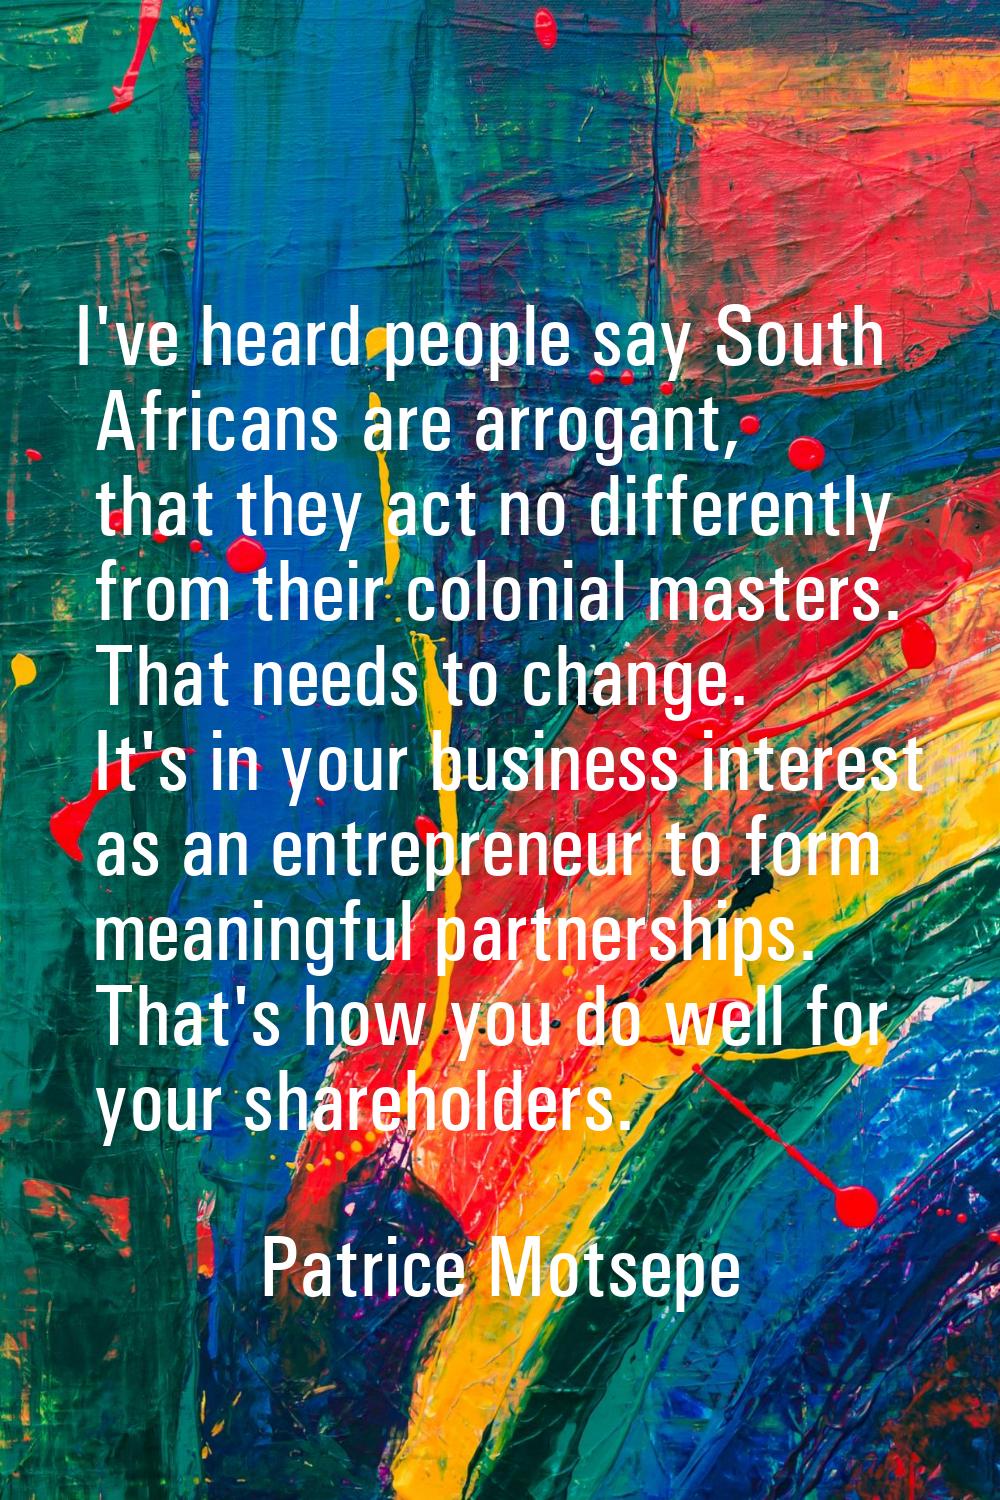 I've heard people say South Africans are arrogant, that they act no differently from their colonial